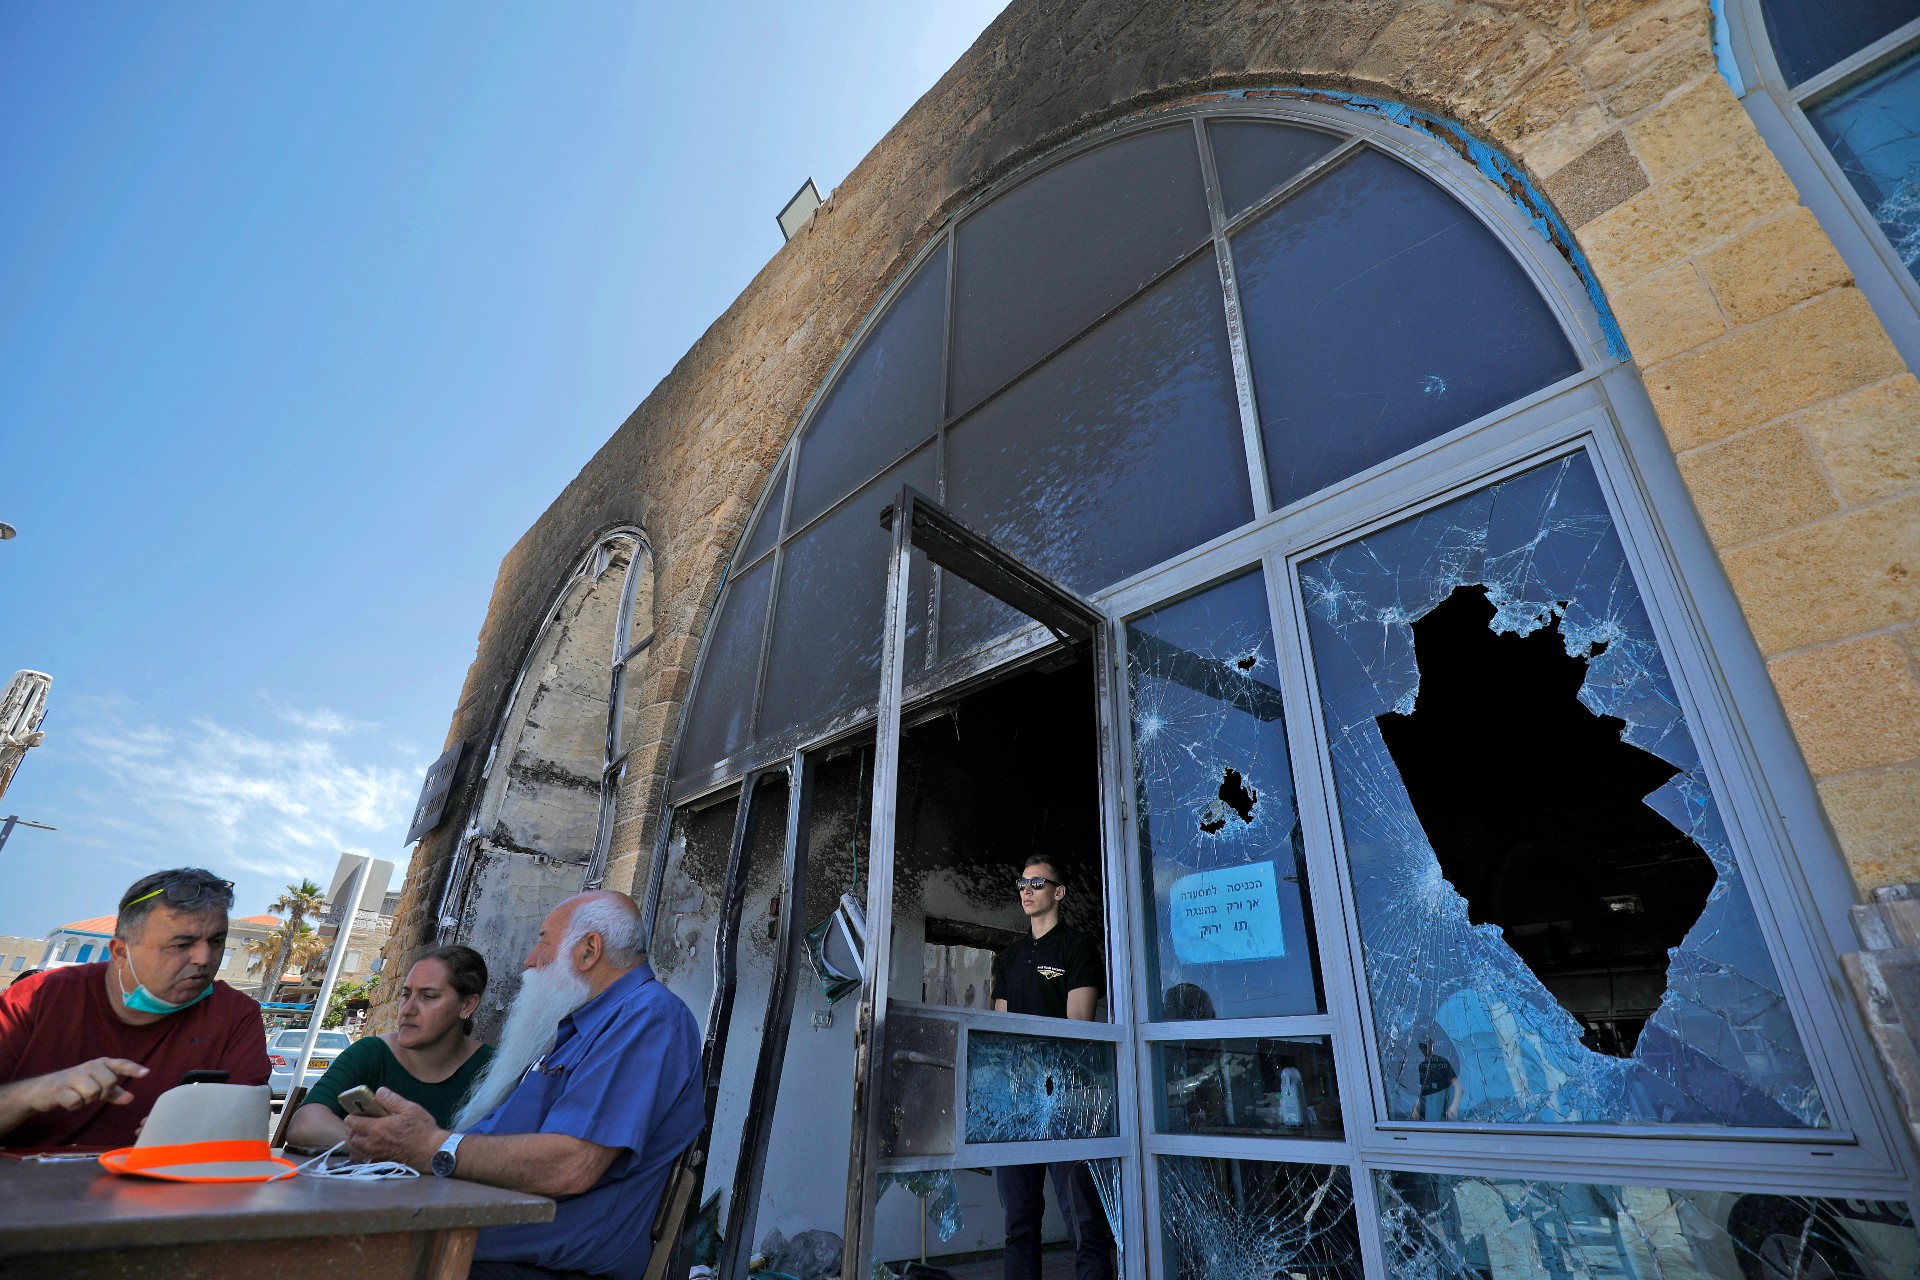 A restaurant in Acre after it was attacked and damaged in May 2021 (AFP)